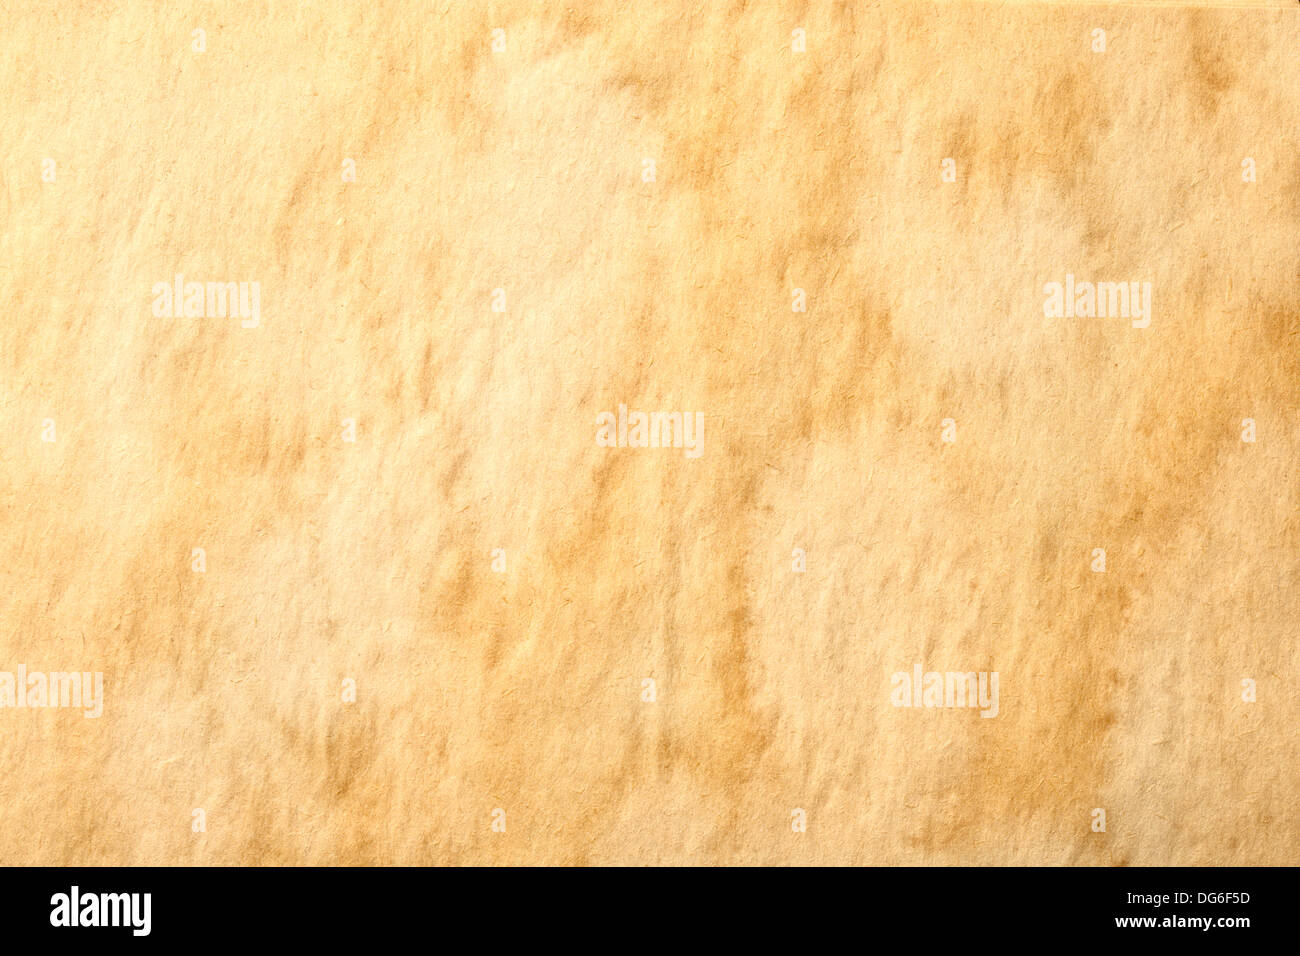 Japanese Paper Texture Background Stock Photo, Picture and Royalty